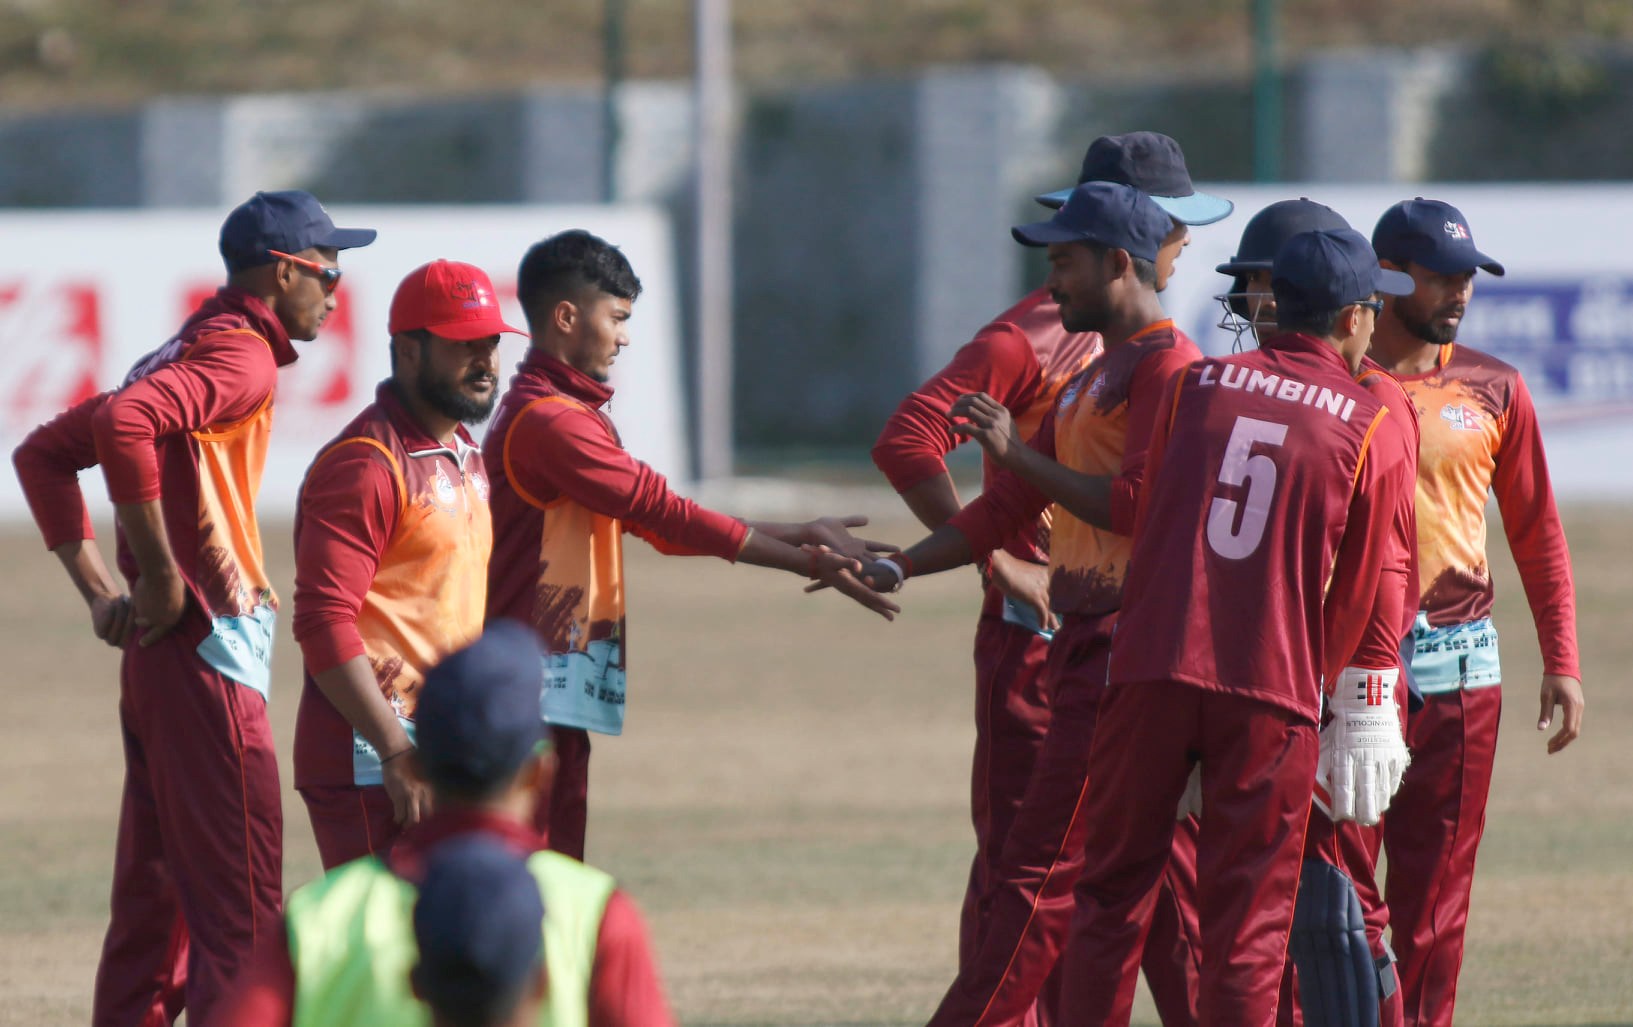 Lumbini got its first victory by defeating State two